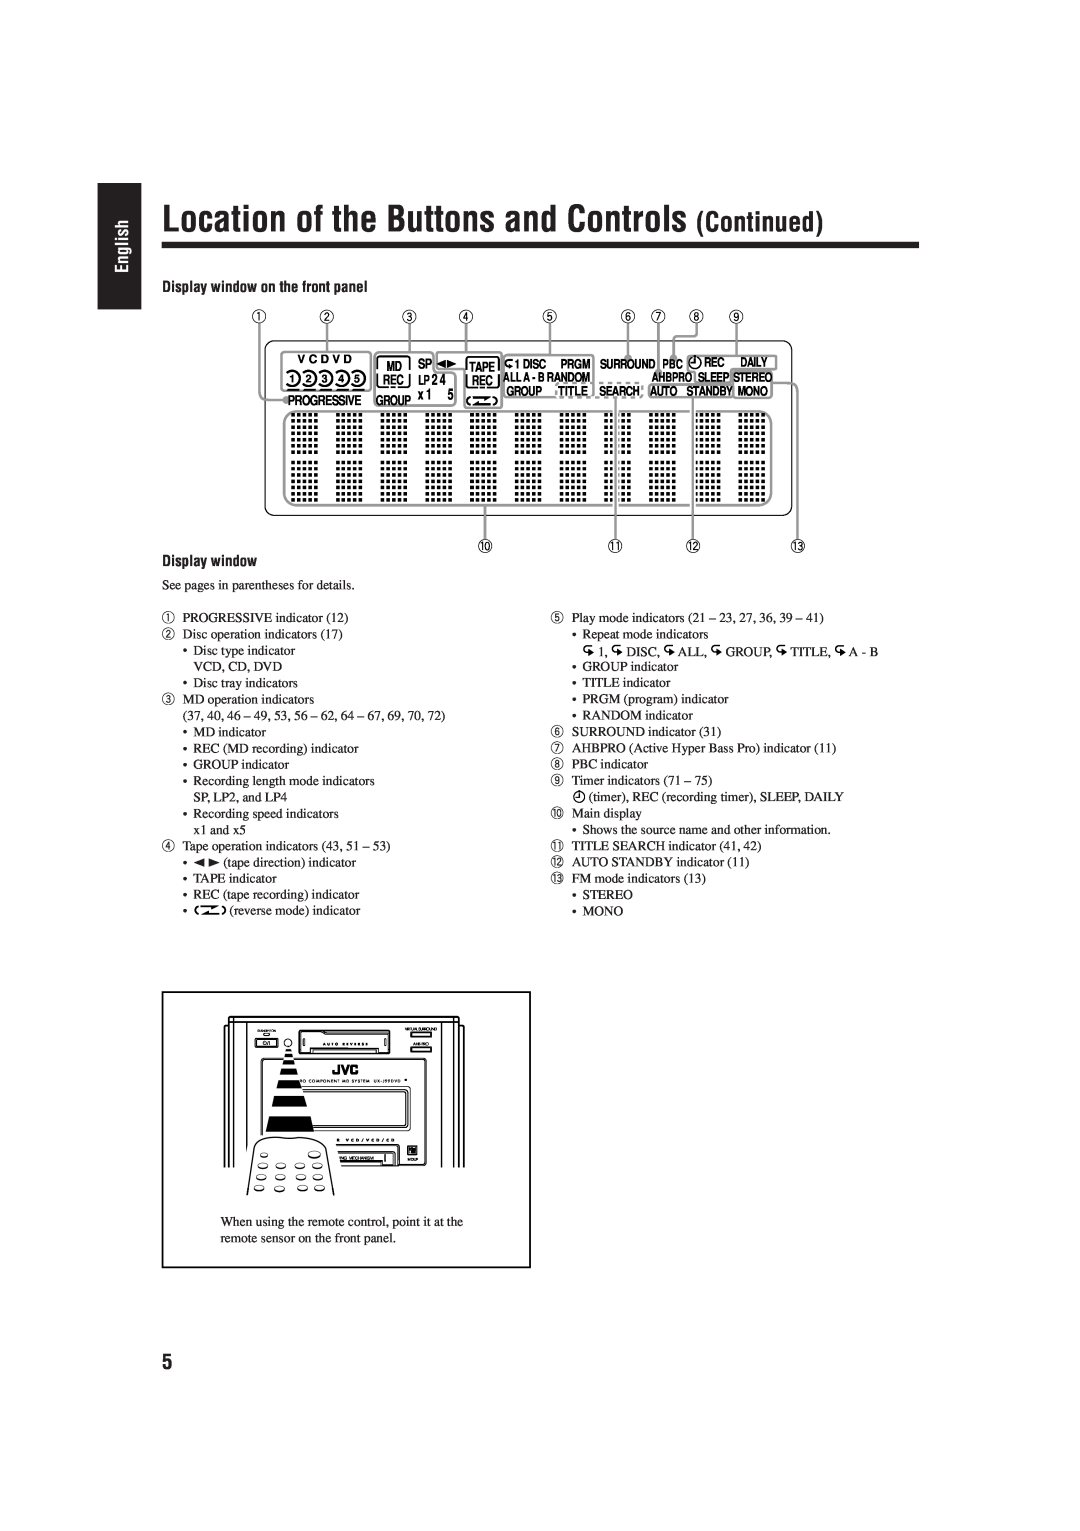 JVC UX-J99DVD manual Location of the Buttons and Controls Continued, English, Display window on the front panel 